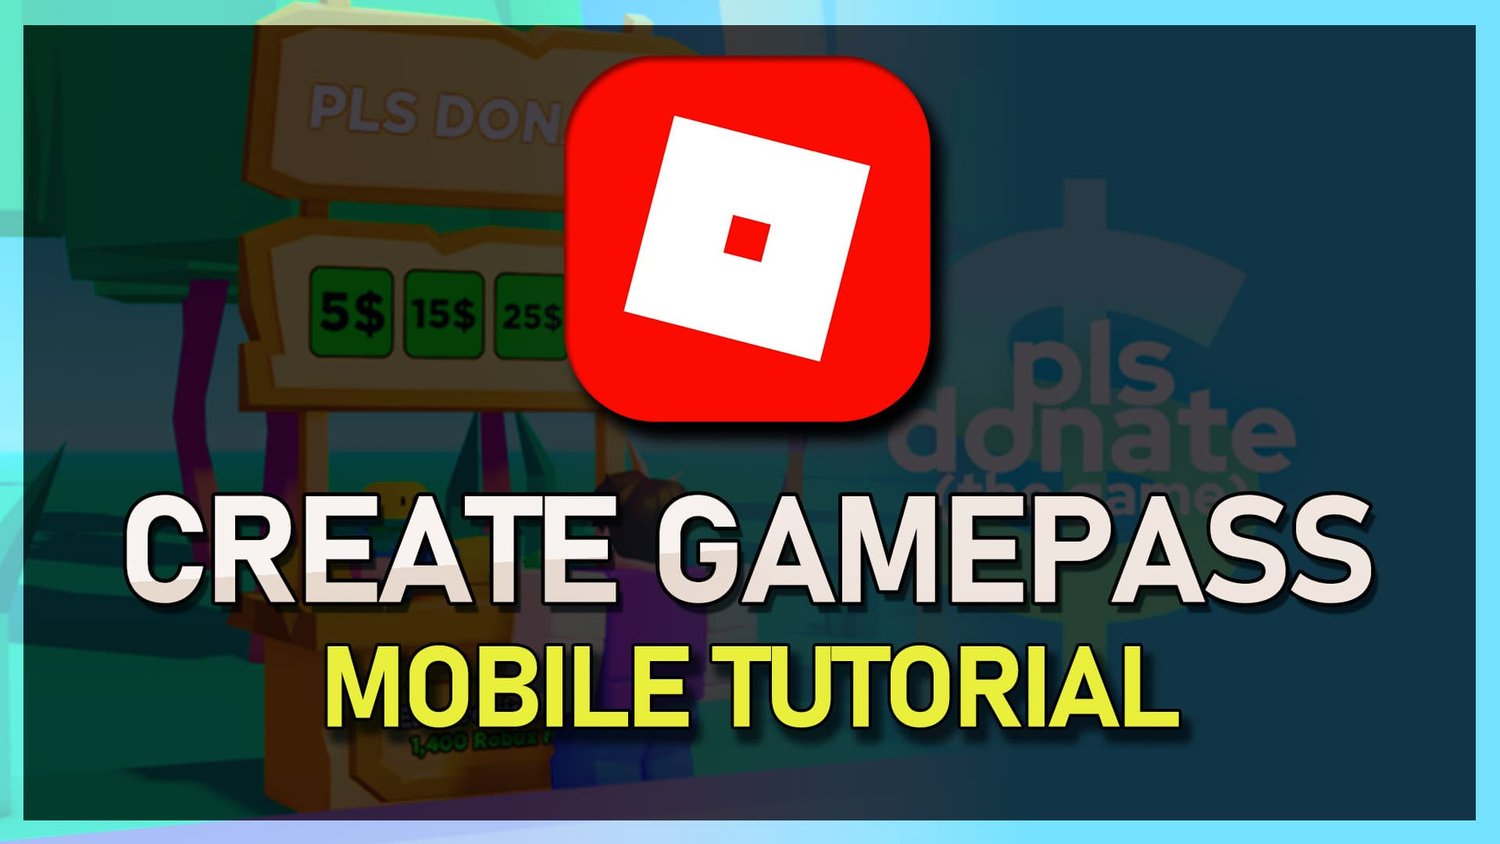 How To Make A Gamepass in Roblox Pls Donate - iOS and Android